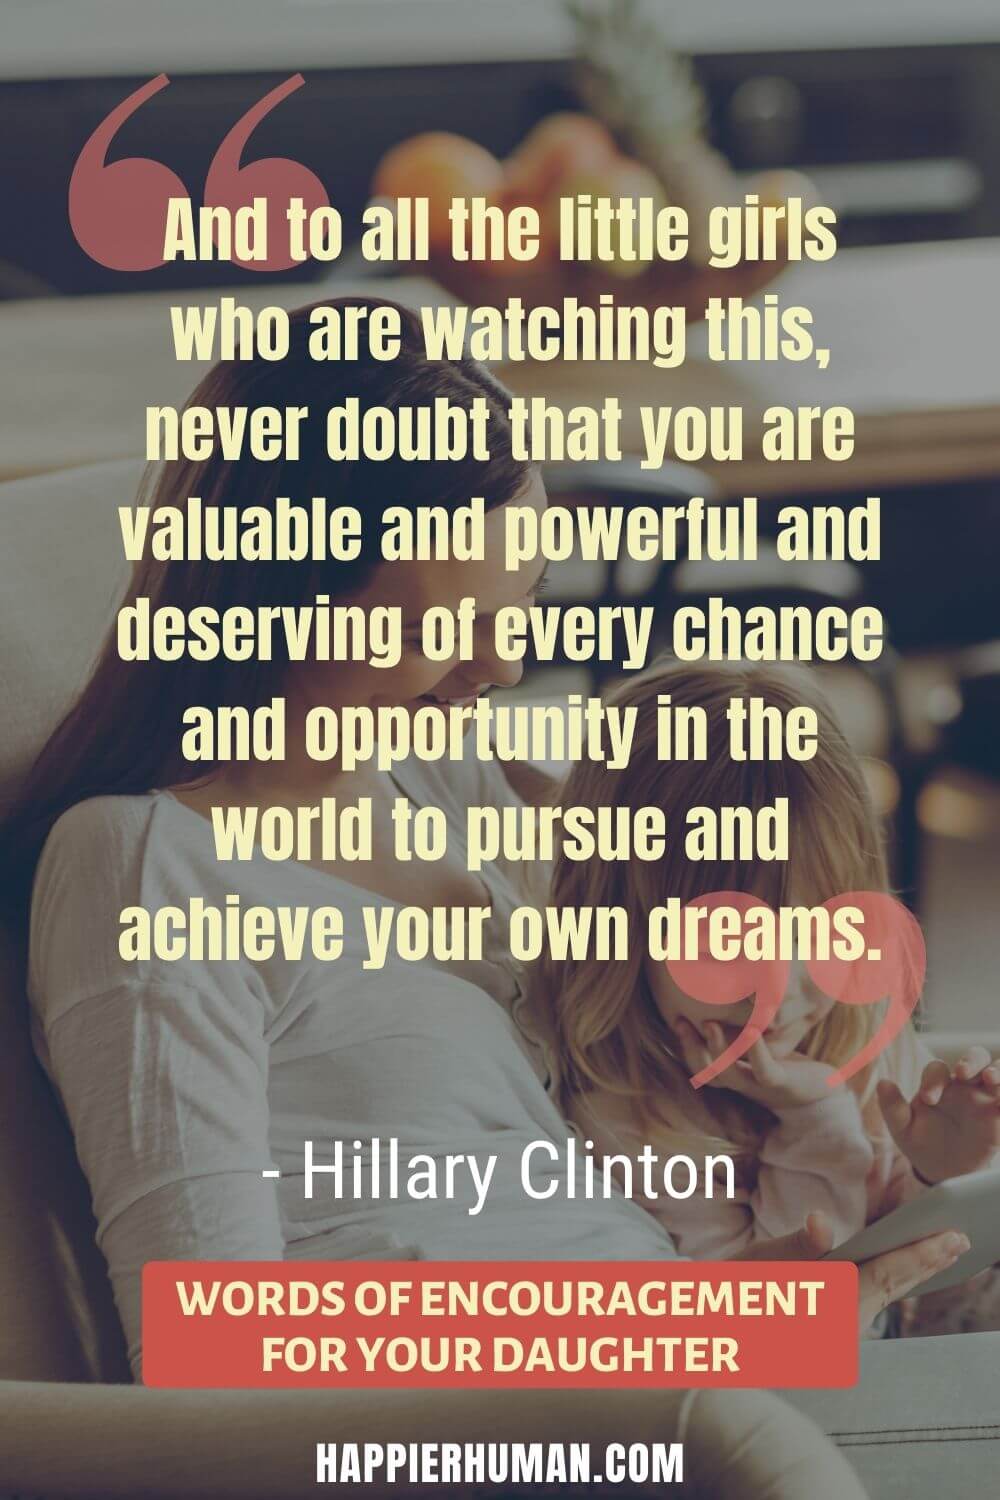 Words of Encouragement for Daughter - “And to all the little girls who are watching this, never doubt that you are valuable and powerful and deserving of every chance and opportunity in the world to pursue and achieve your own dreams.” - Hillary Clinton | bible words of encouragement for daughter | daily words of encouragement for daughter | words of encouragement for daughters